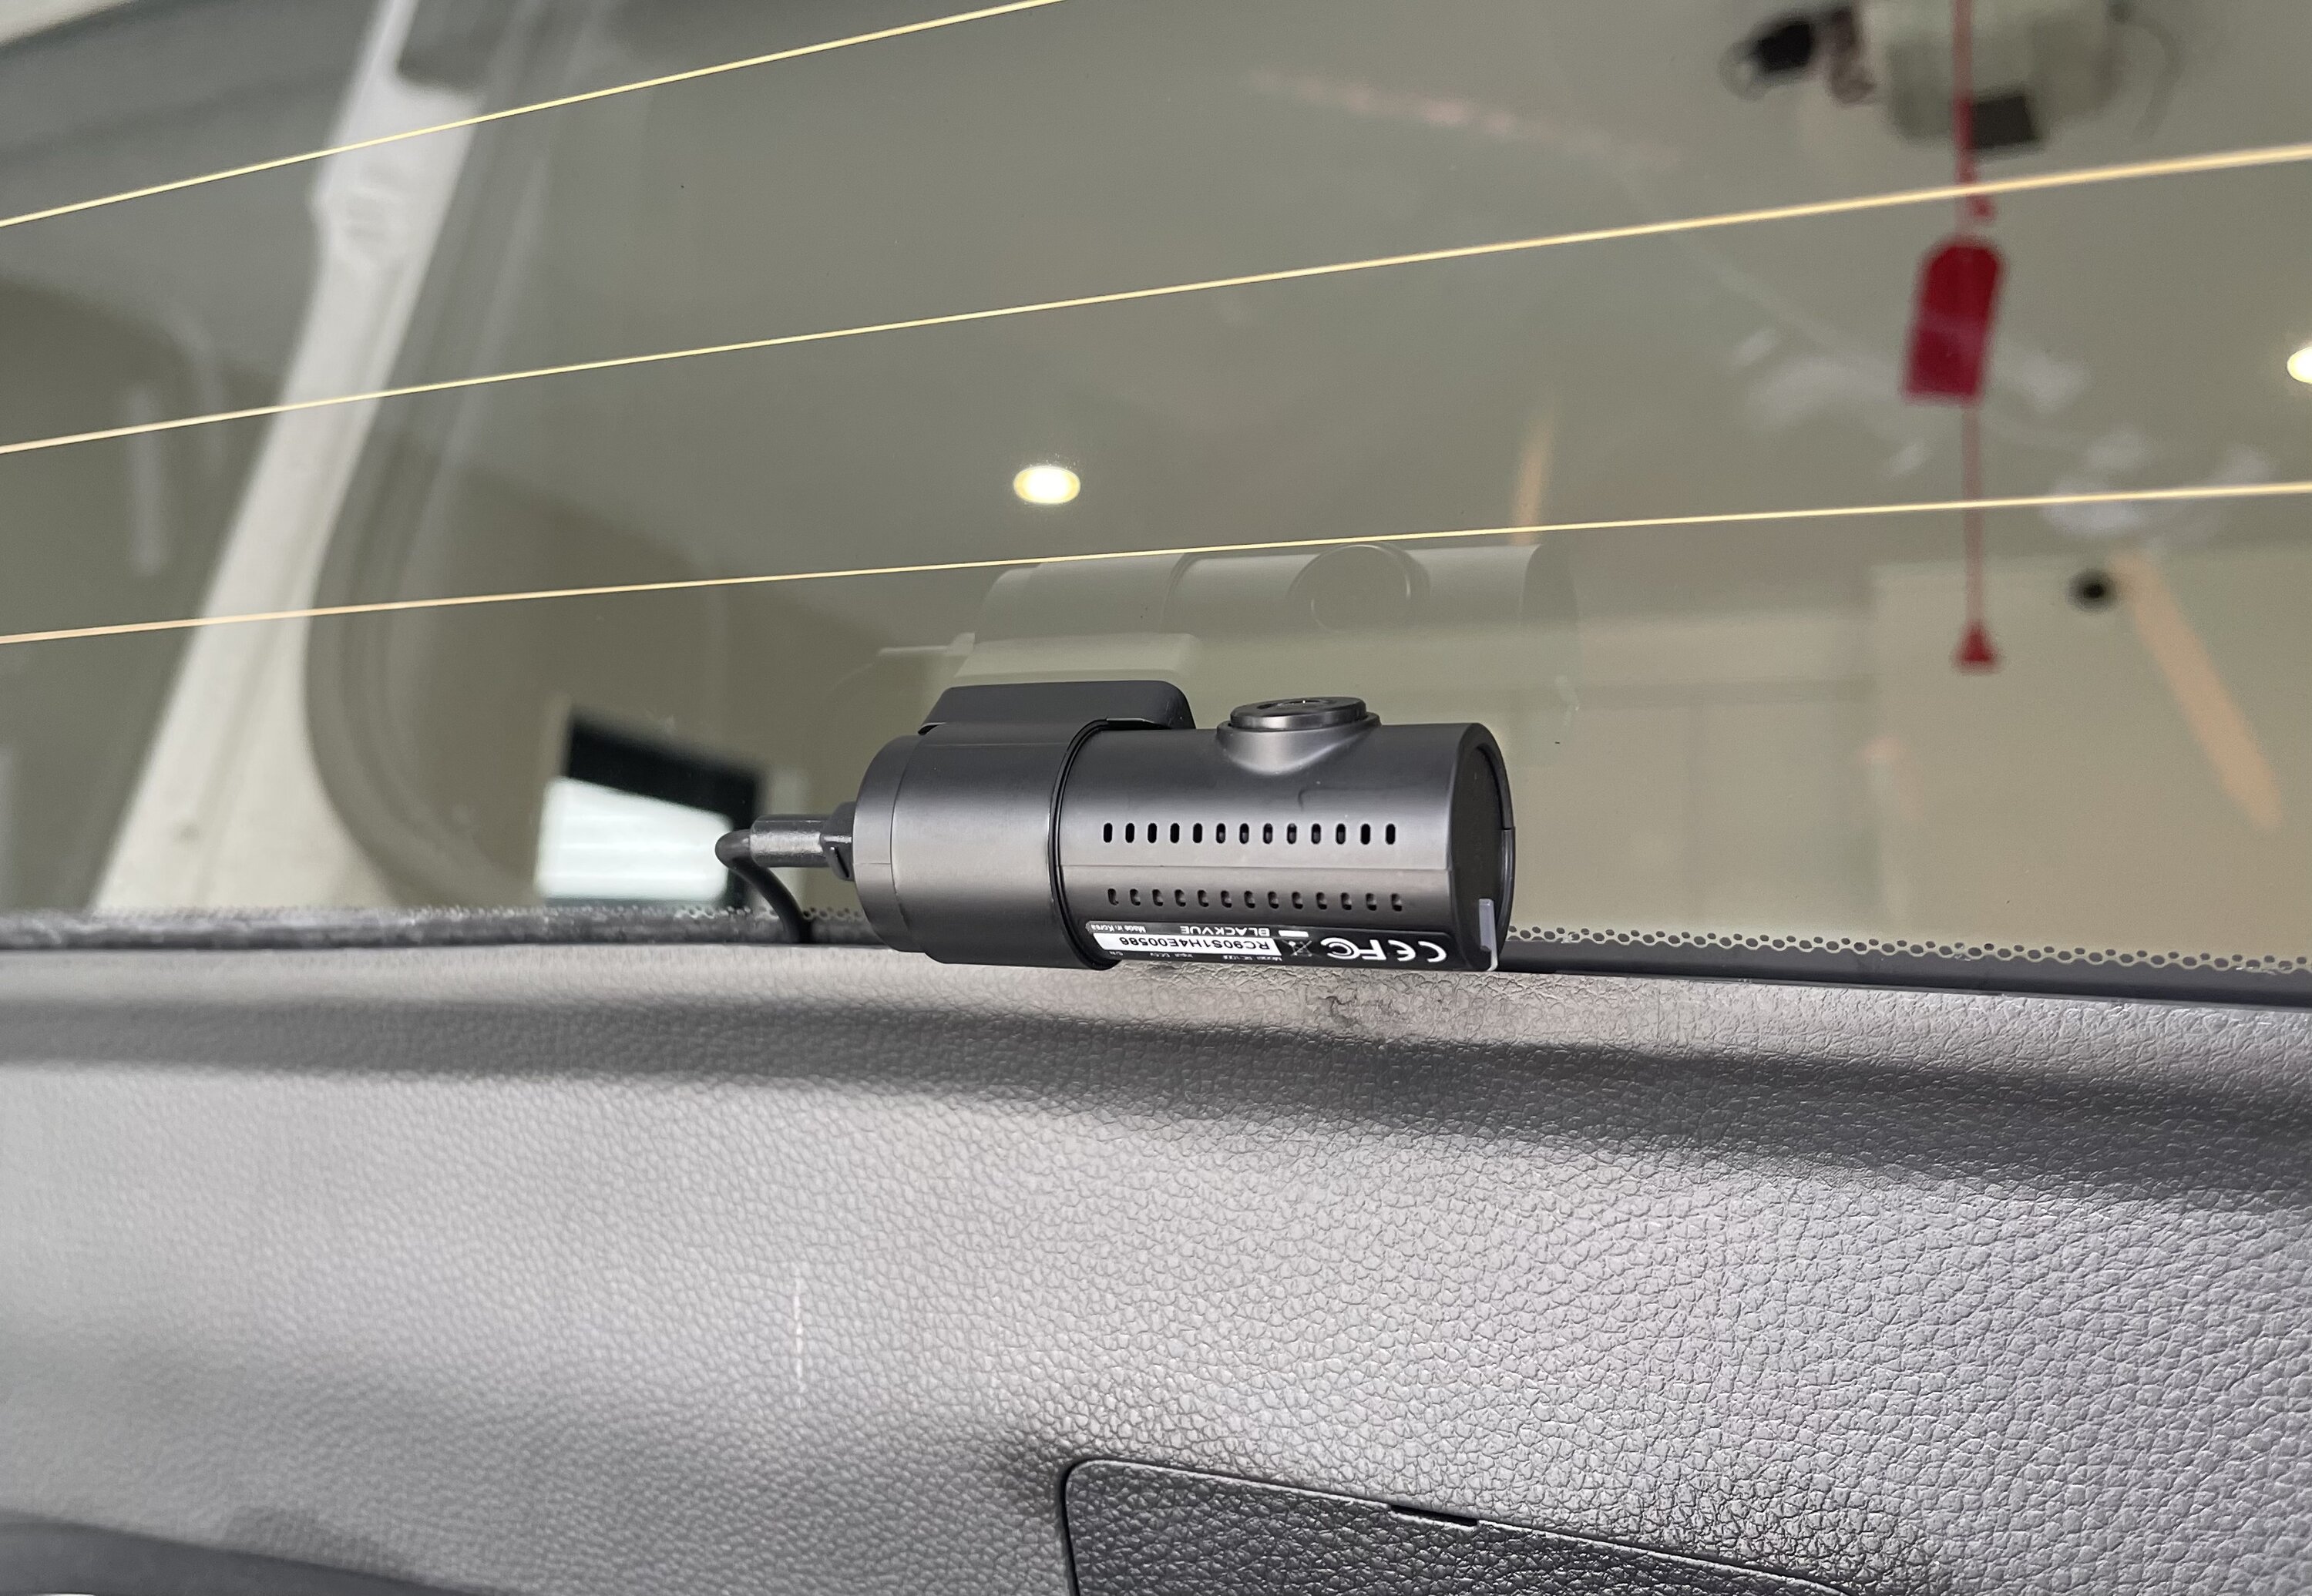 Is There a Dash Cam Without Wires?